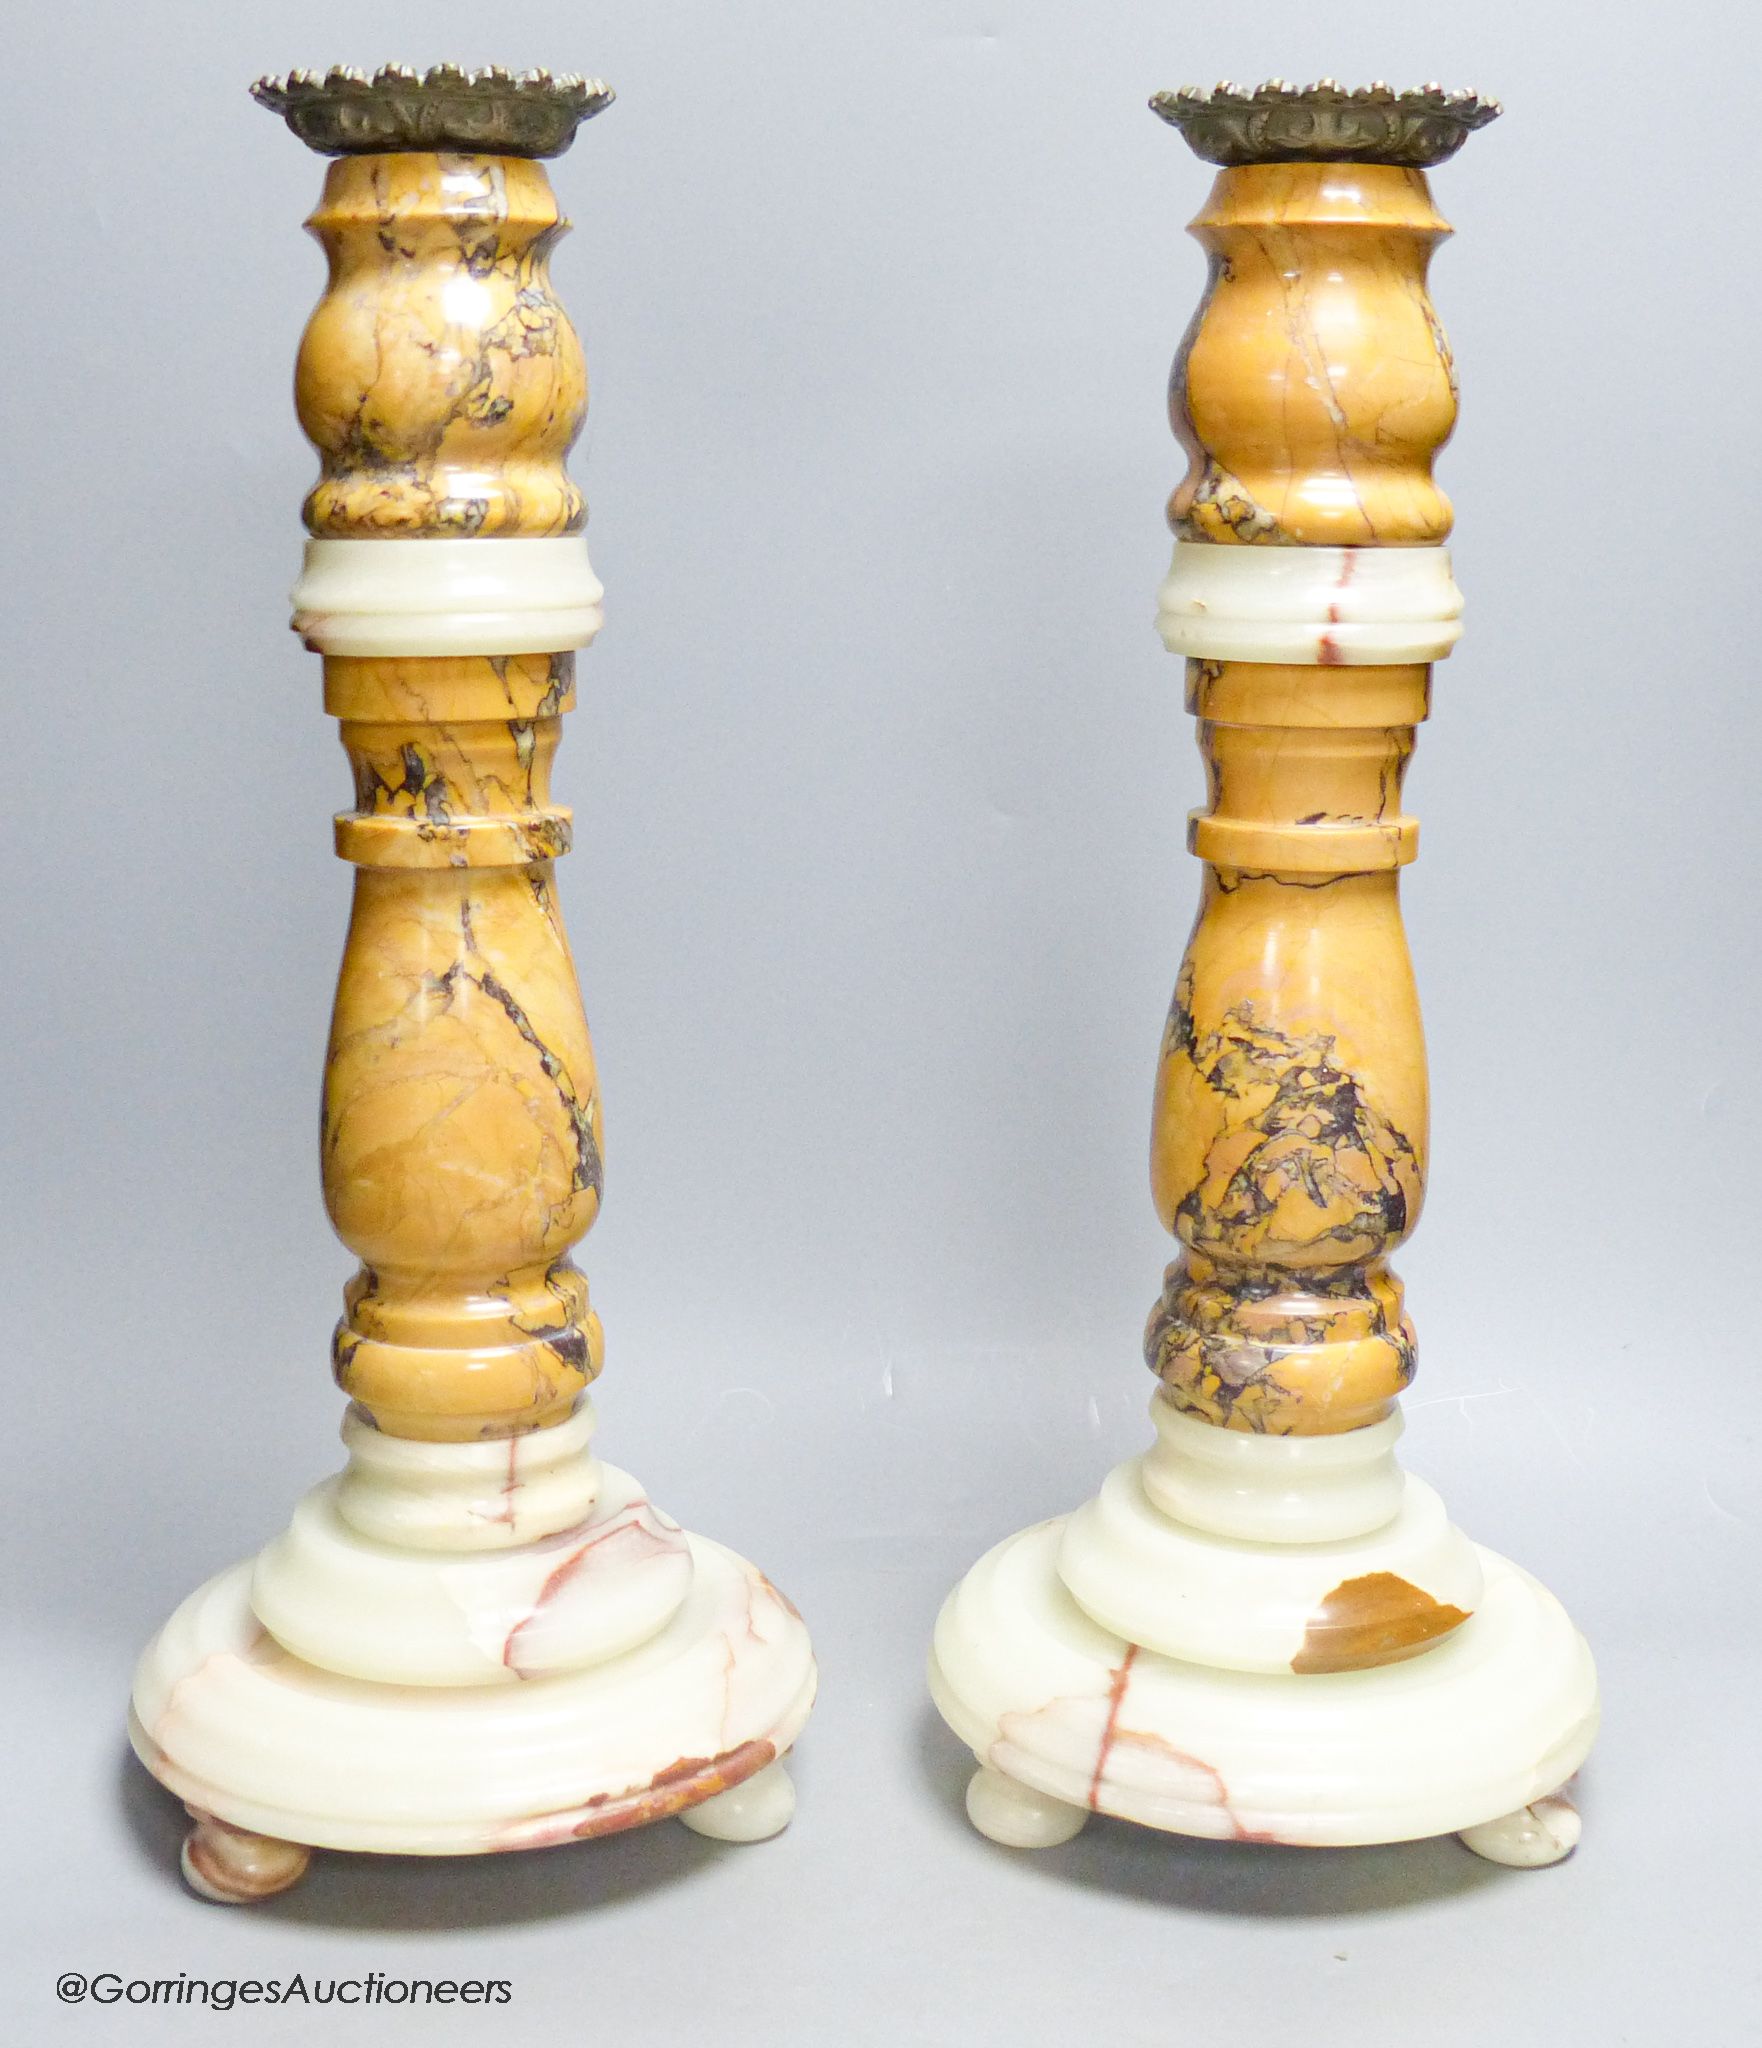 A large pair of 19th century variegated turned marble and onyx candlestands, height 46cm - Image 2 of 2